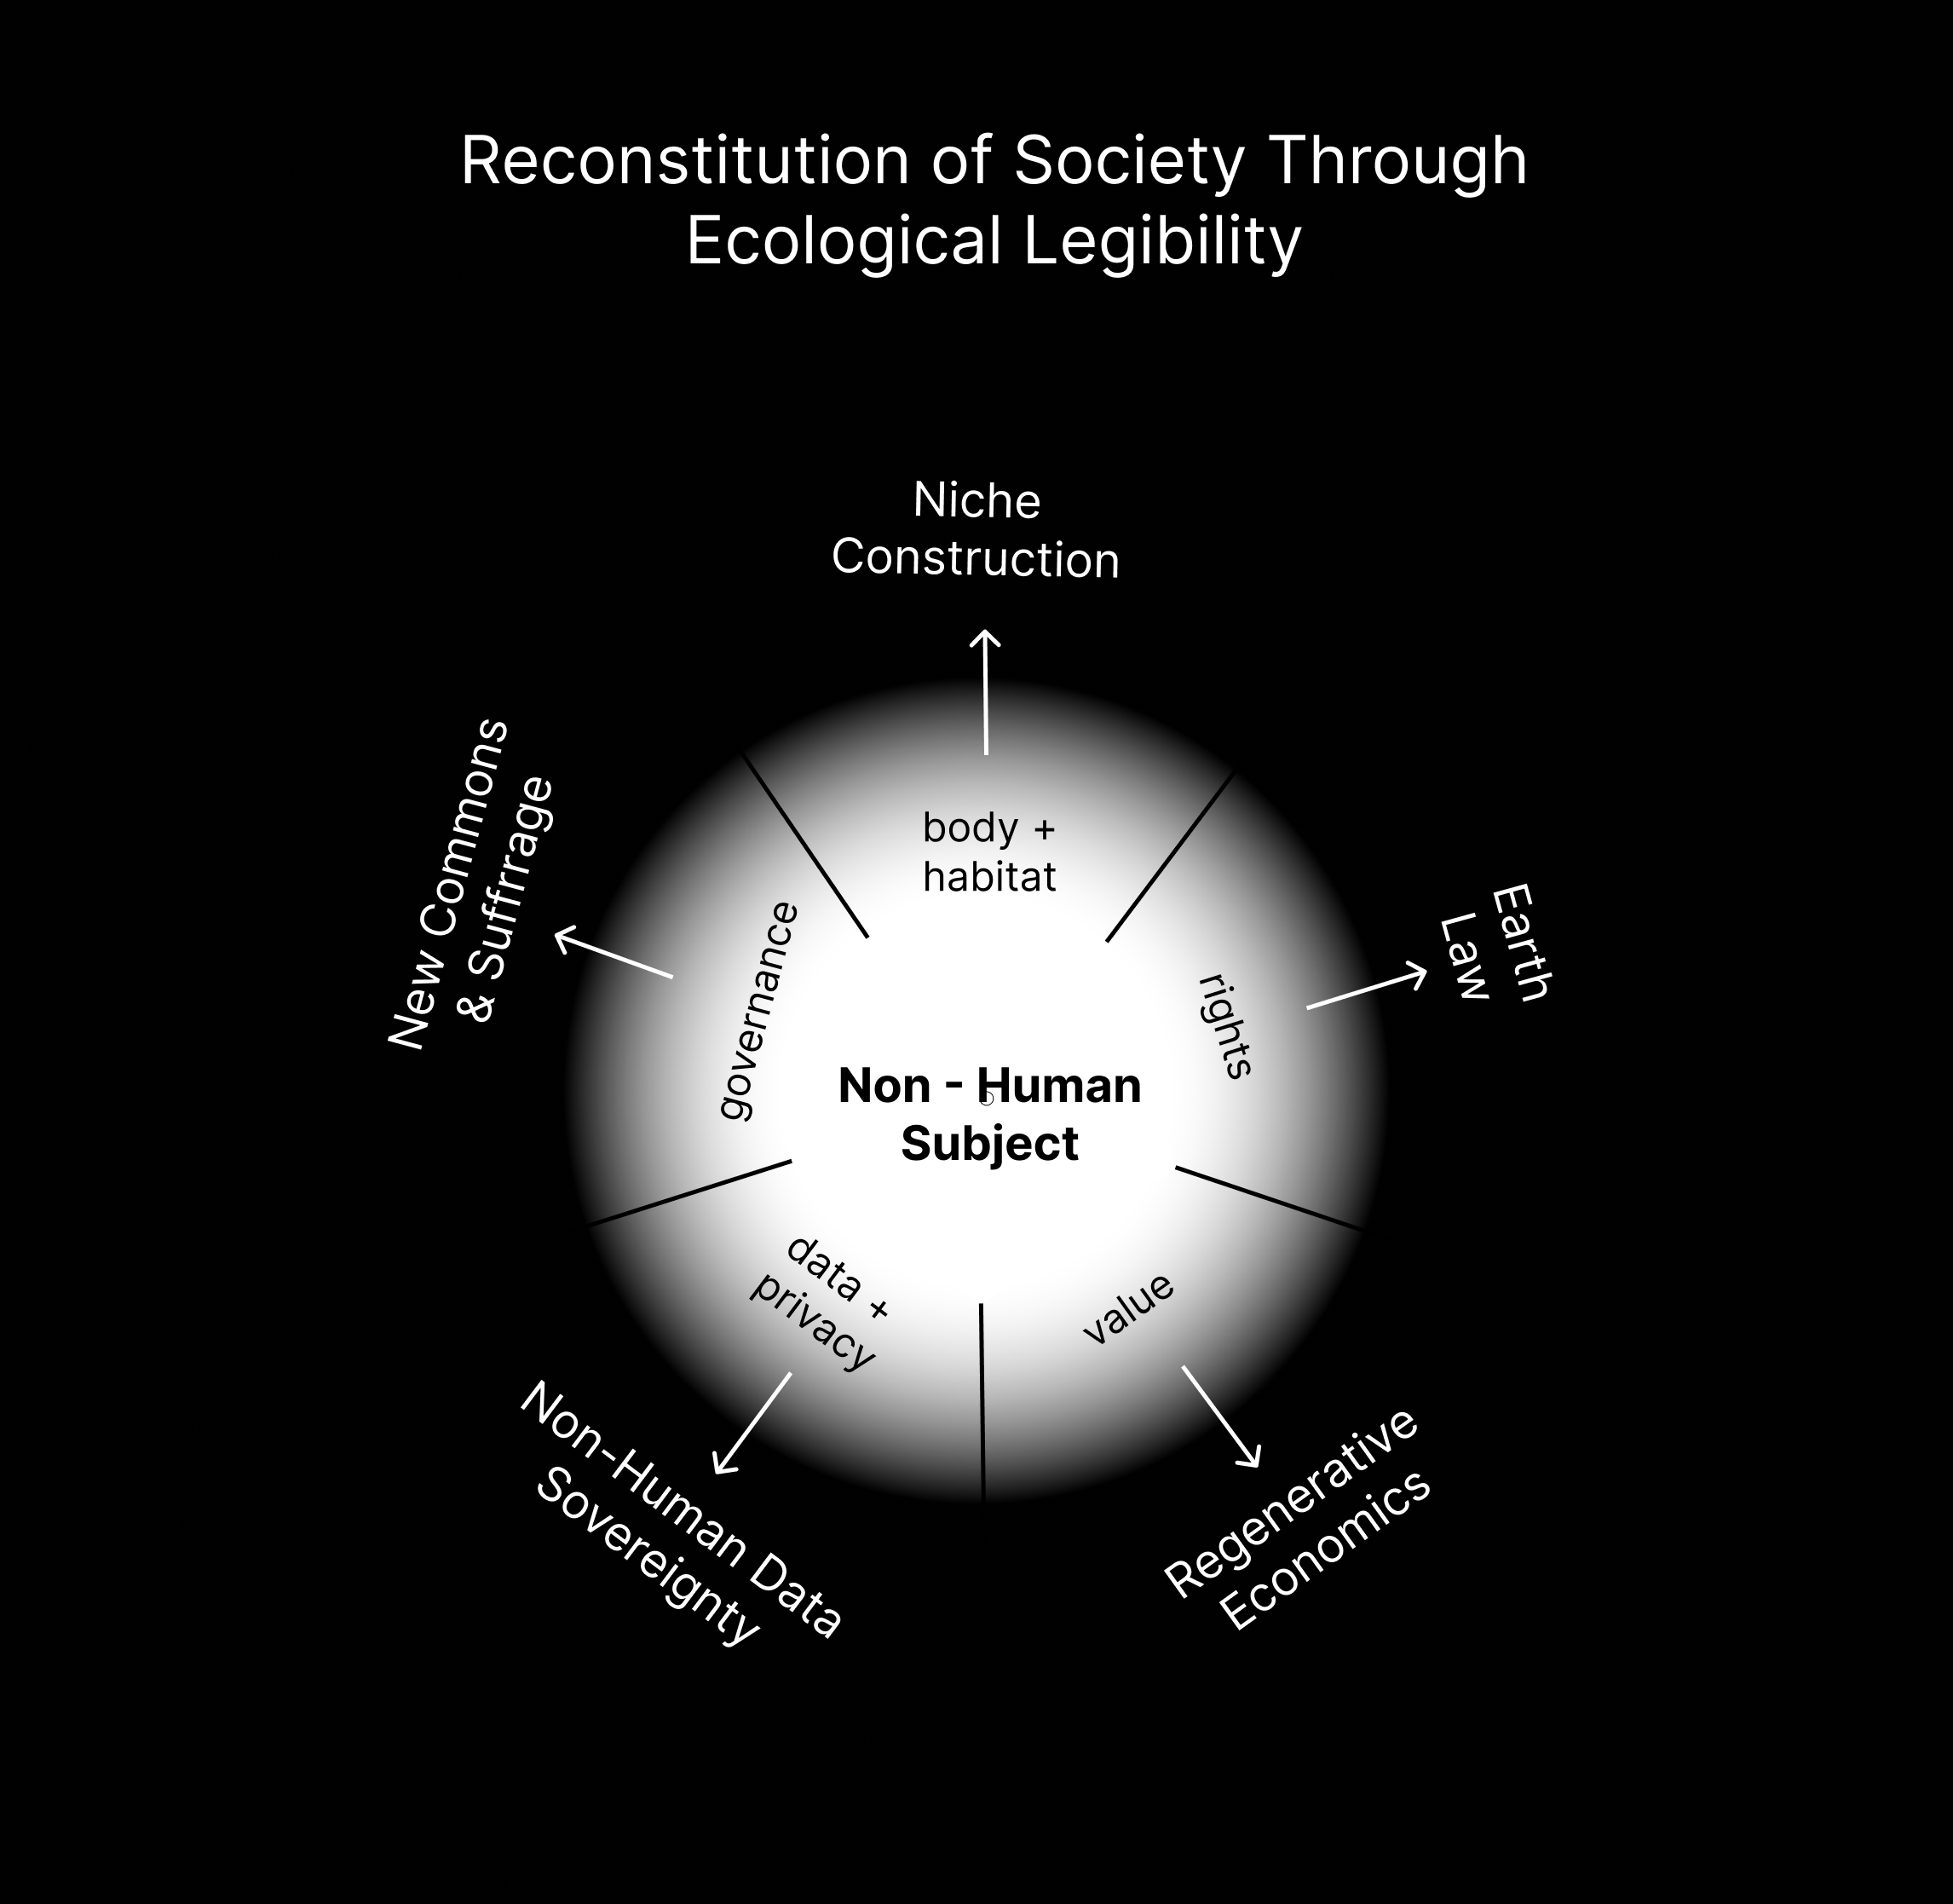 The reconstitution of social life through ecological legibility.